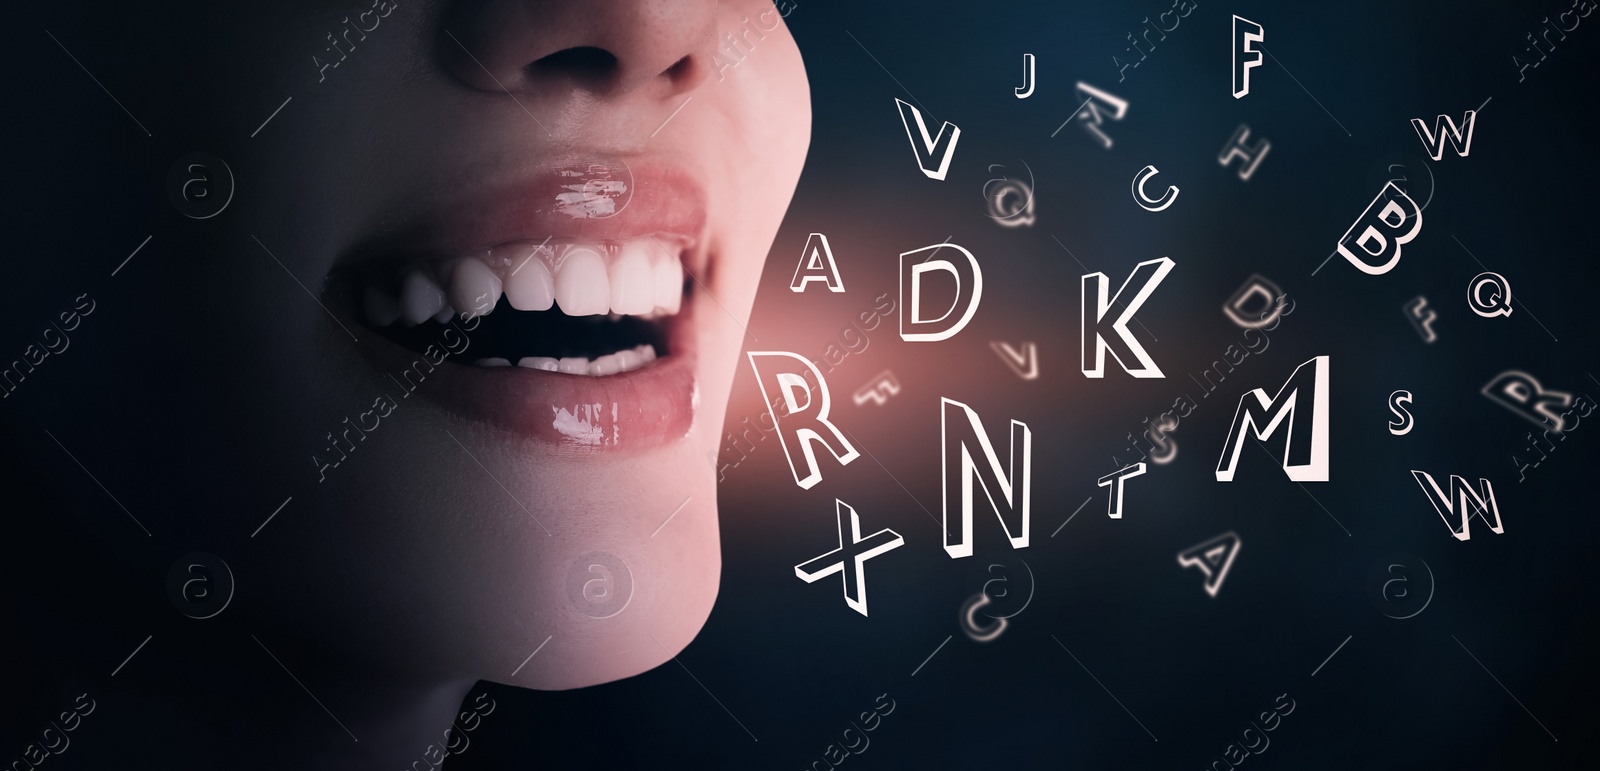 Image of Smiling woman and letters on dark background, closeup. Banner design